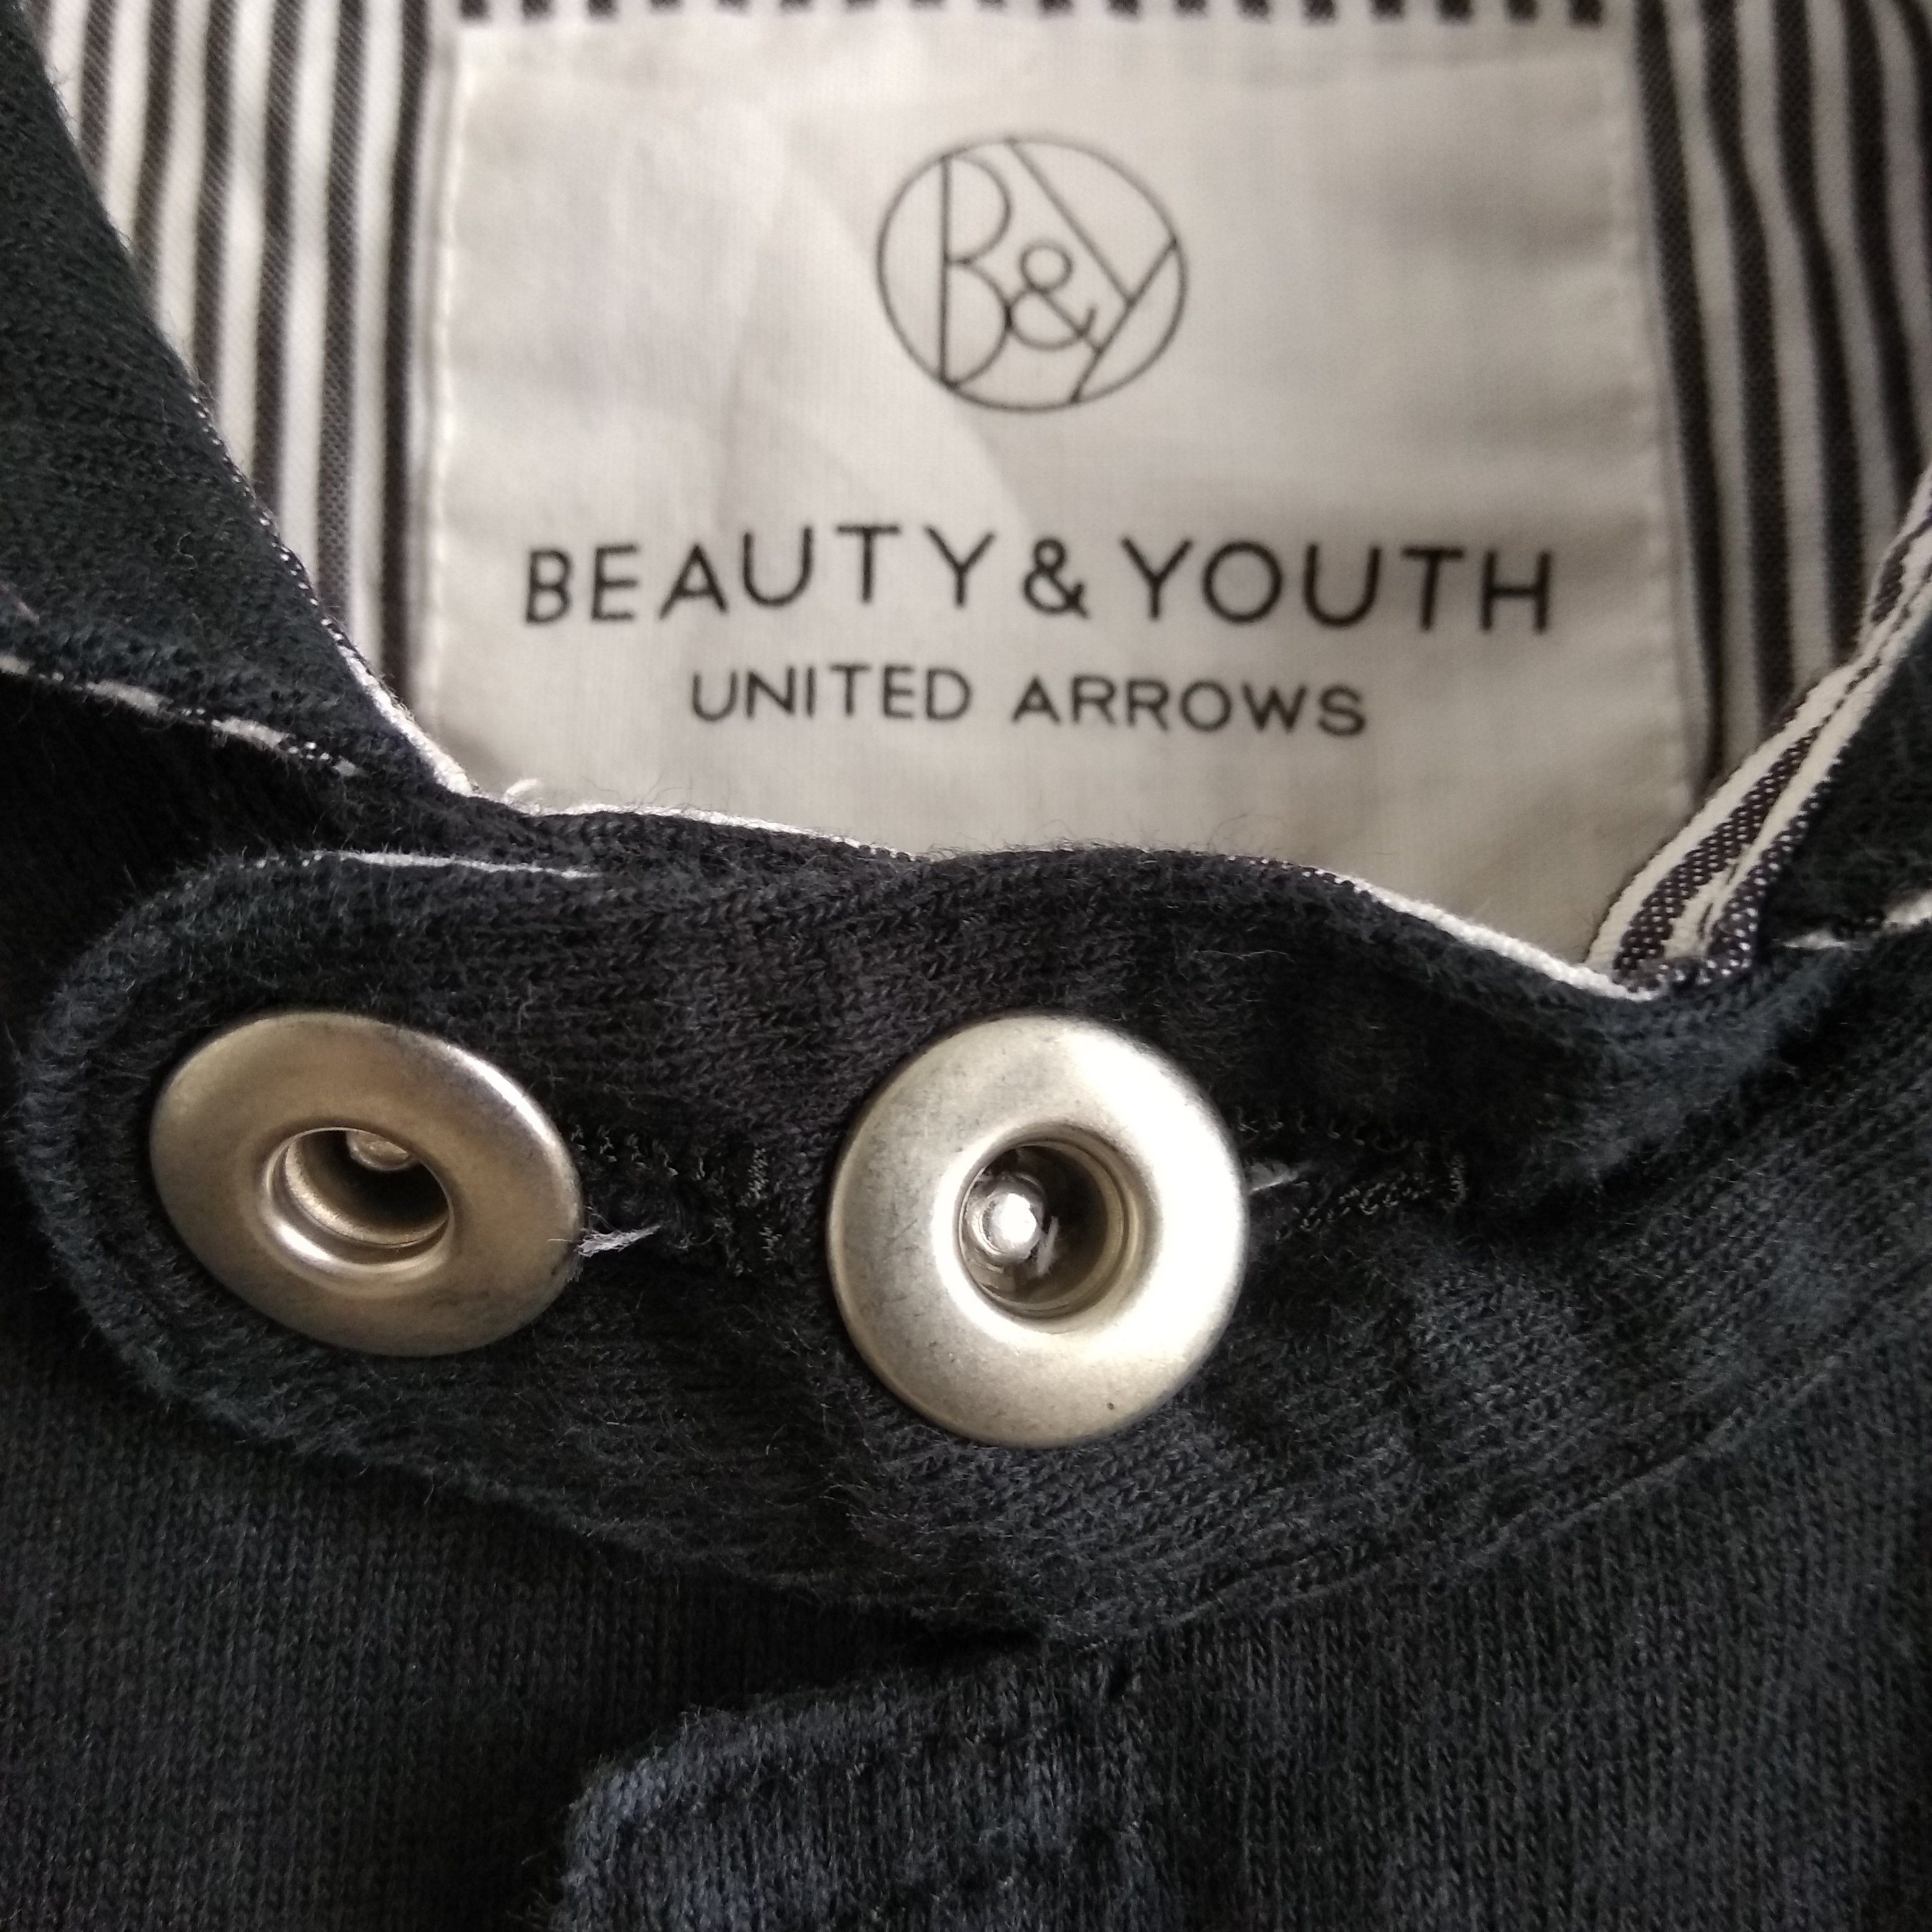 Beauty & Youth United Arrows jacket coat button - 3